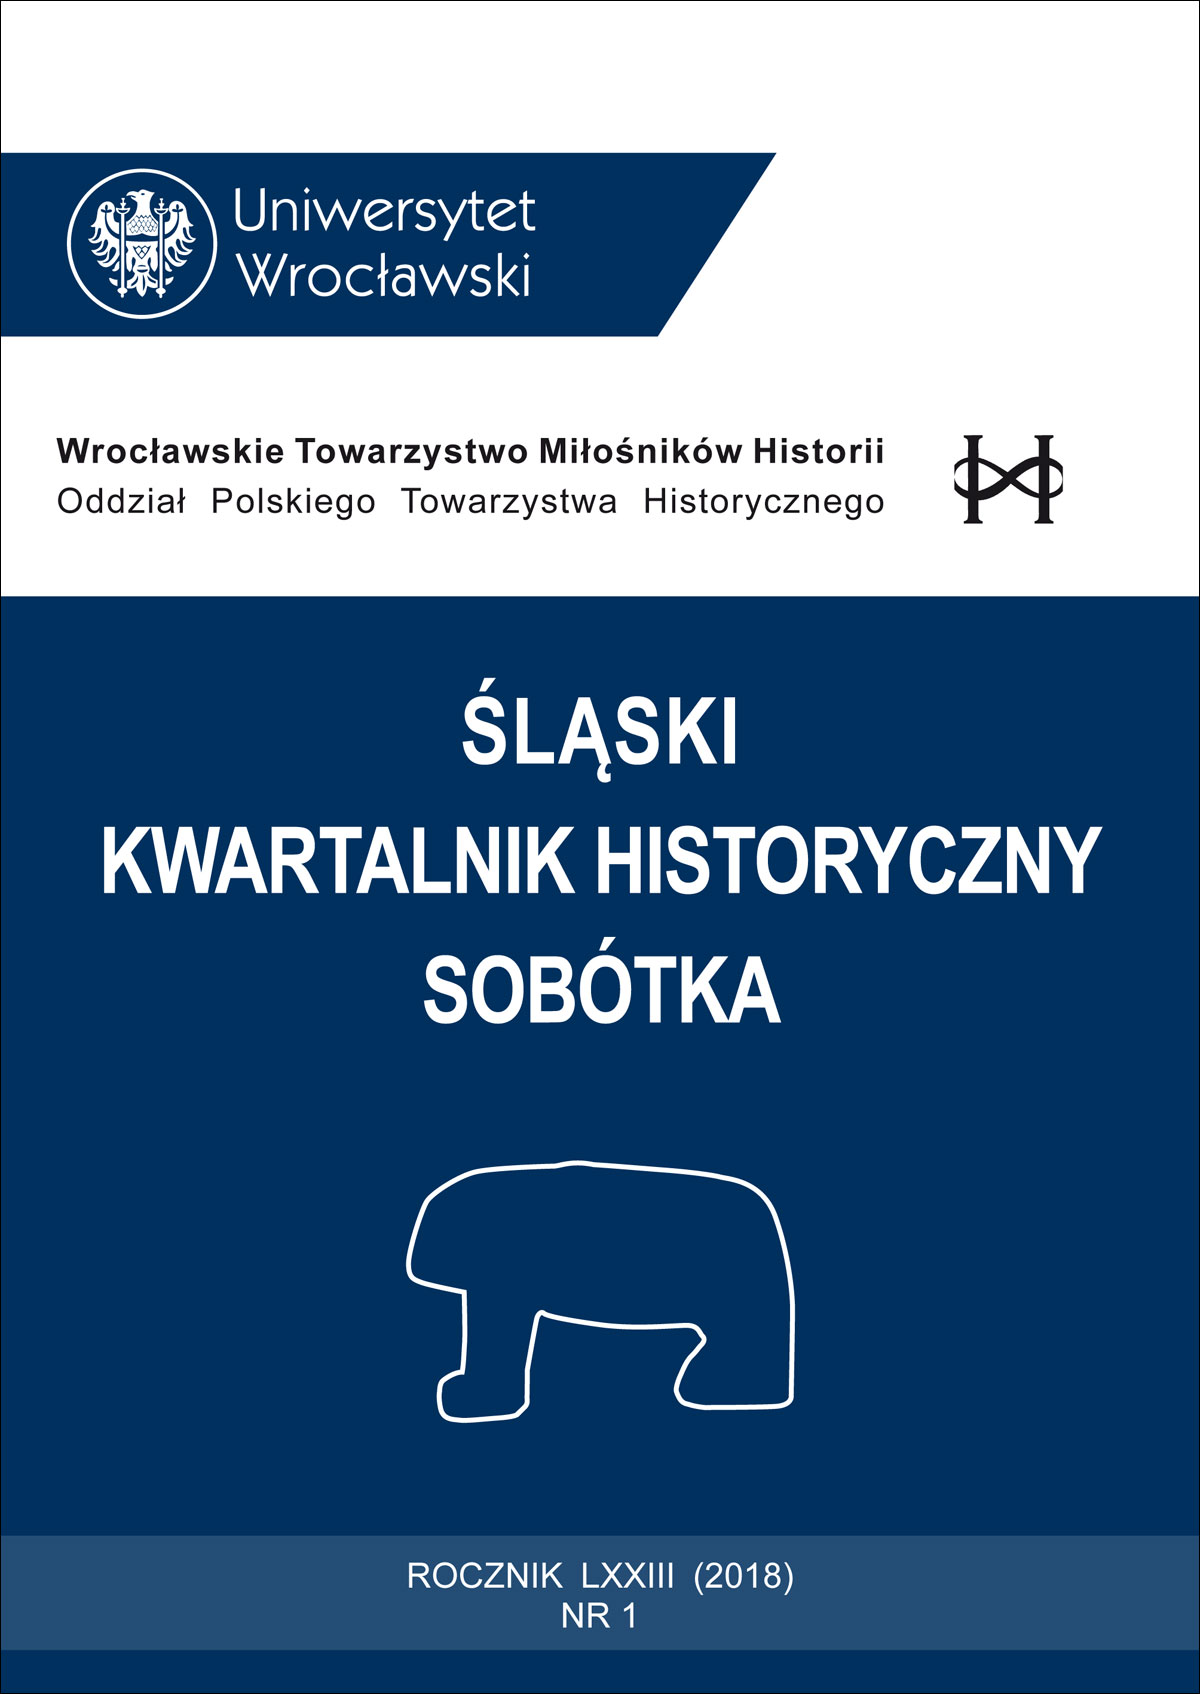 Jewish orphanages in Lower Silesia run by th Central Committee of Jews in Poland (CCJP) – an outline of the subject Cover Image